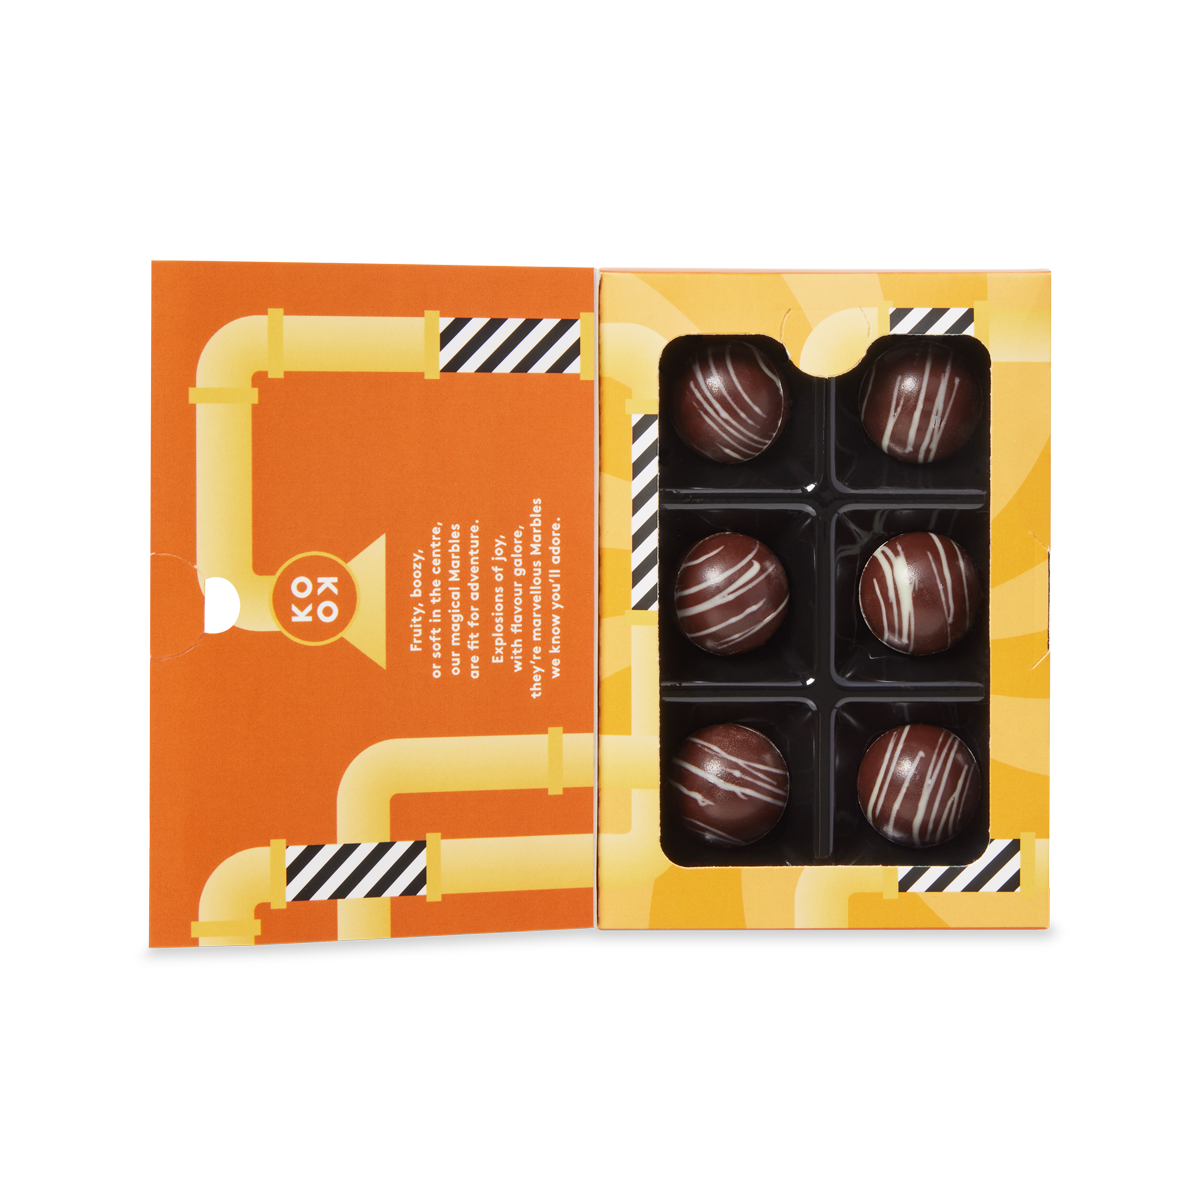 Perfect Passionfruit Marbles | Dark Chocolate